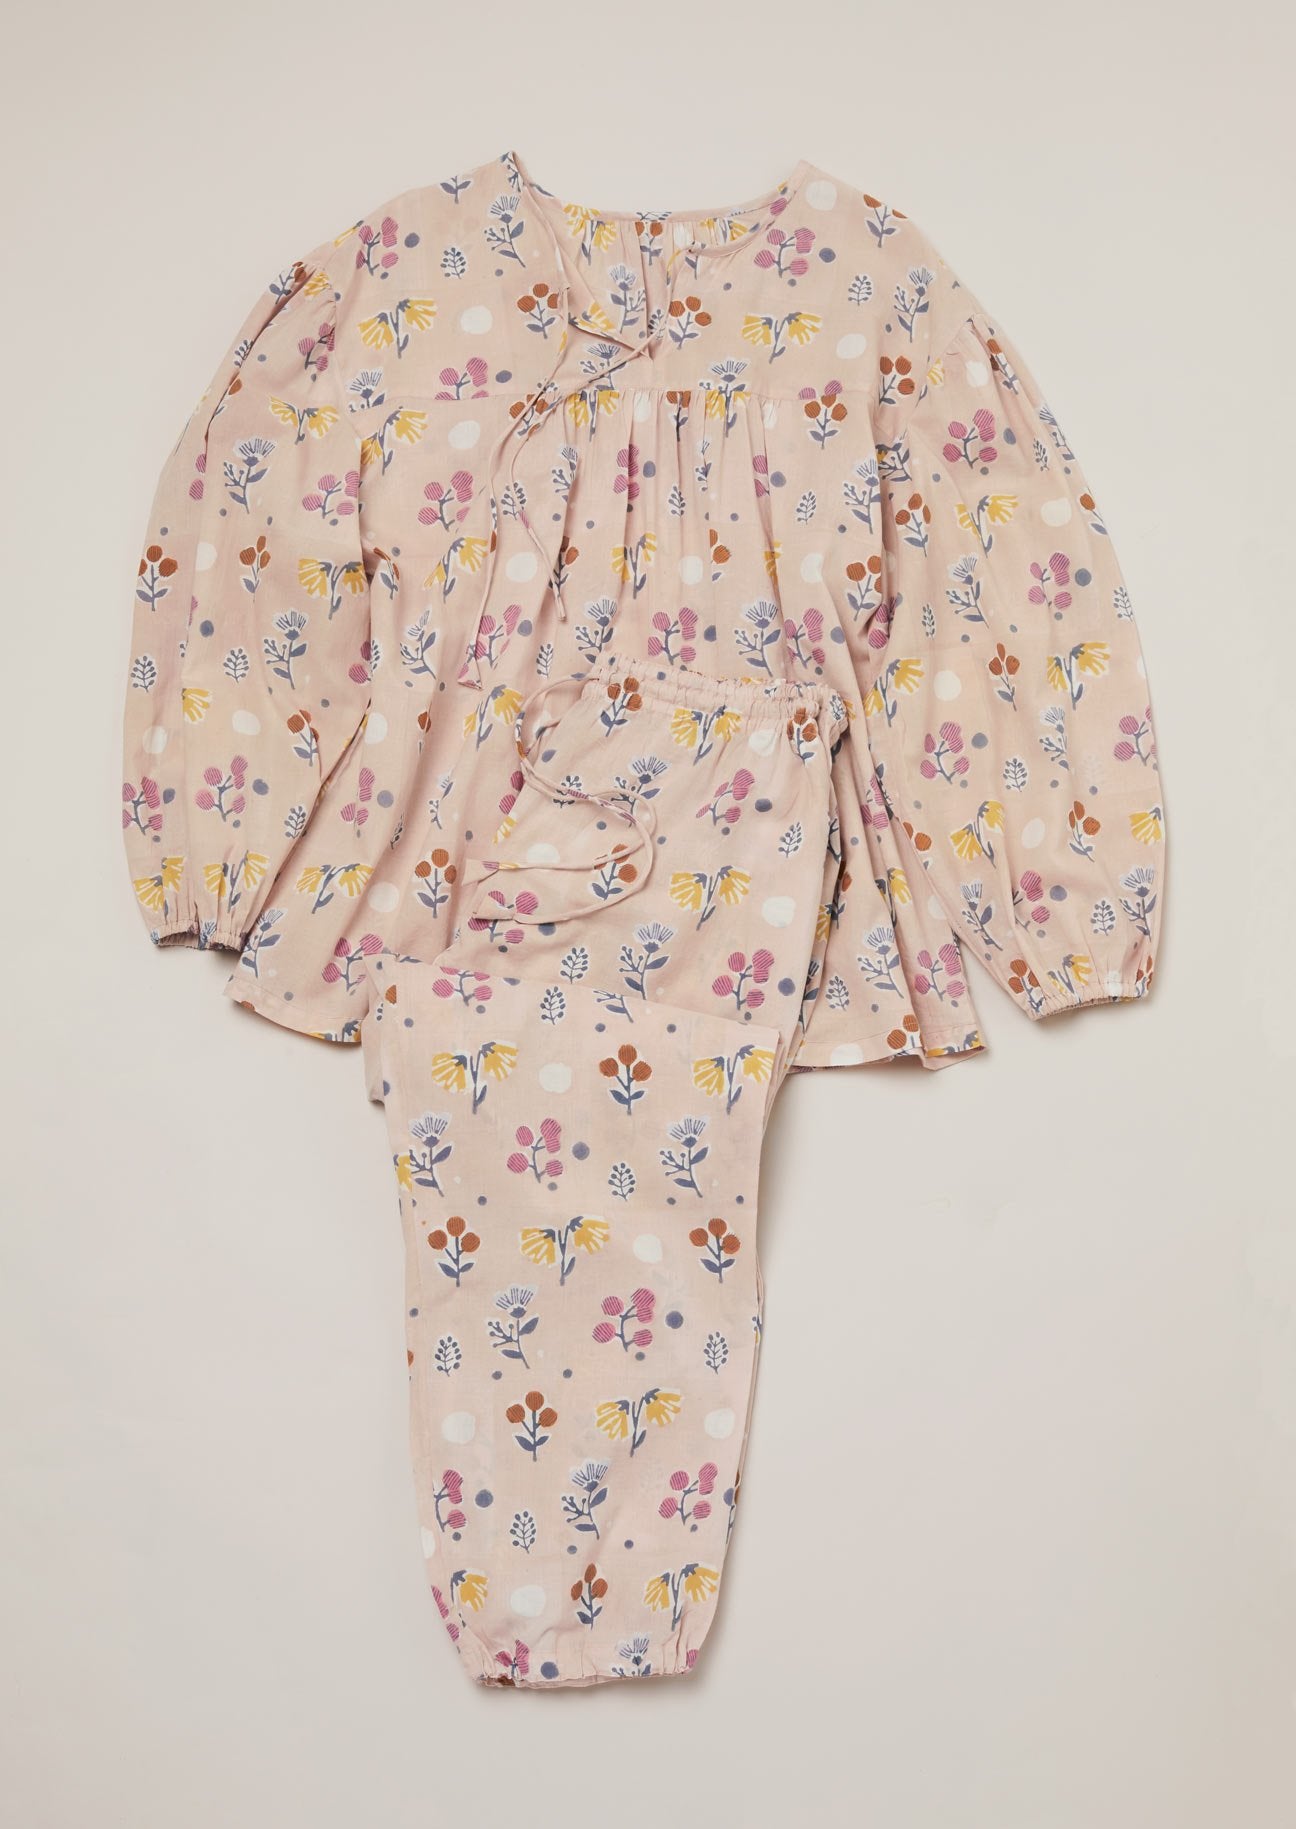 Block printed dusty pink pyjama set in multicoloured small floral design.